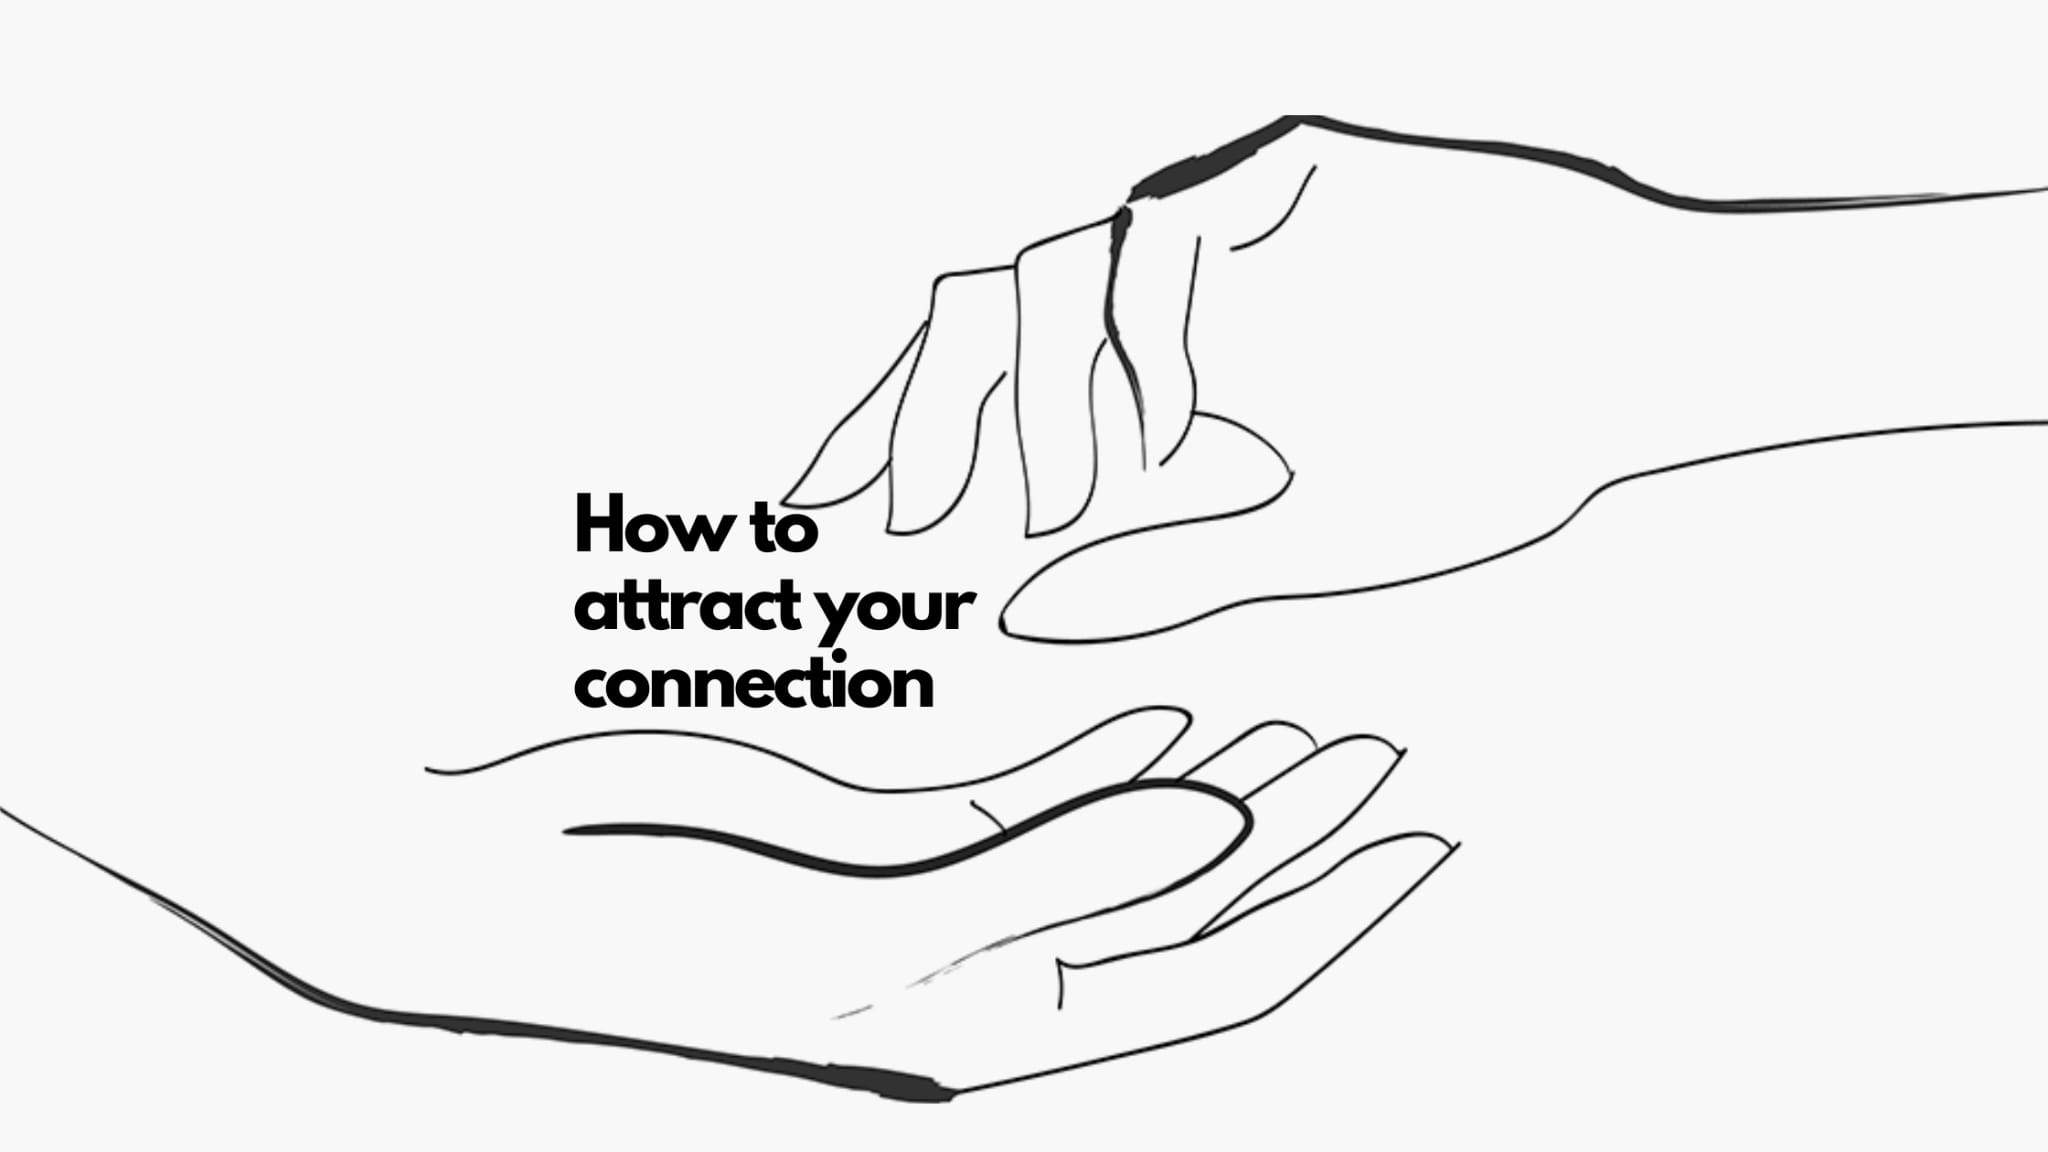 How To Attract Your Connection